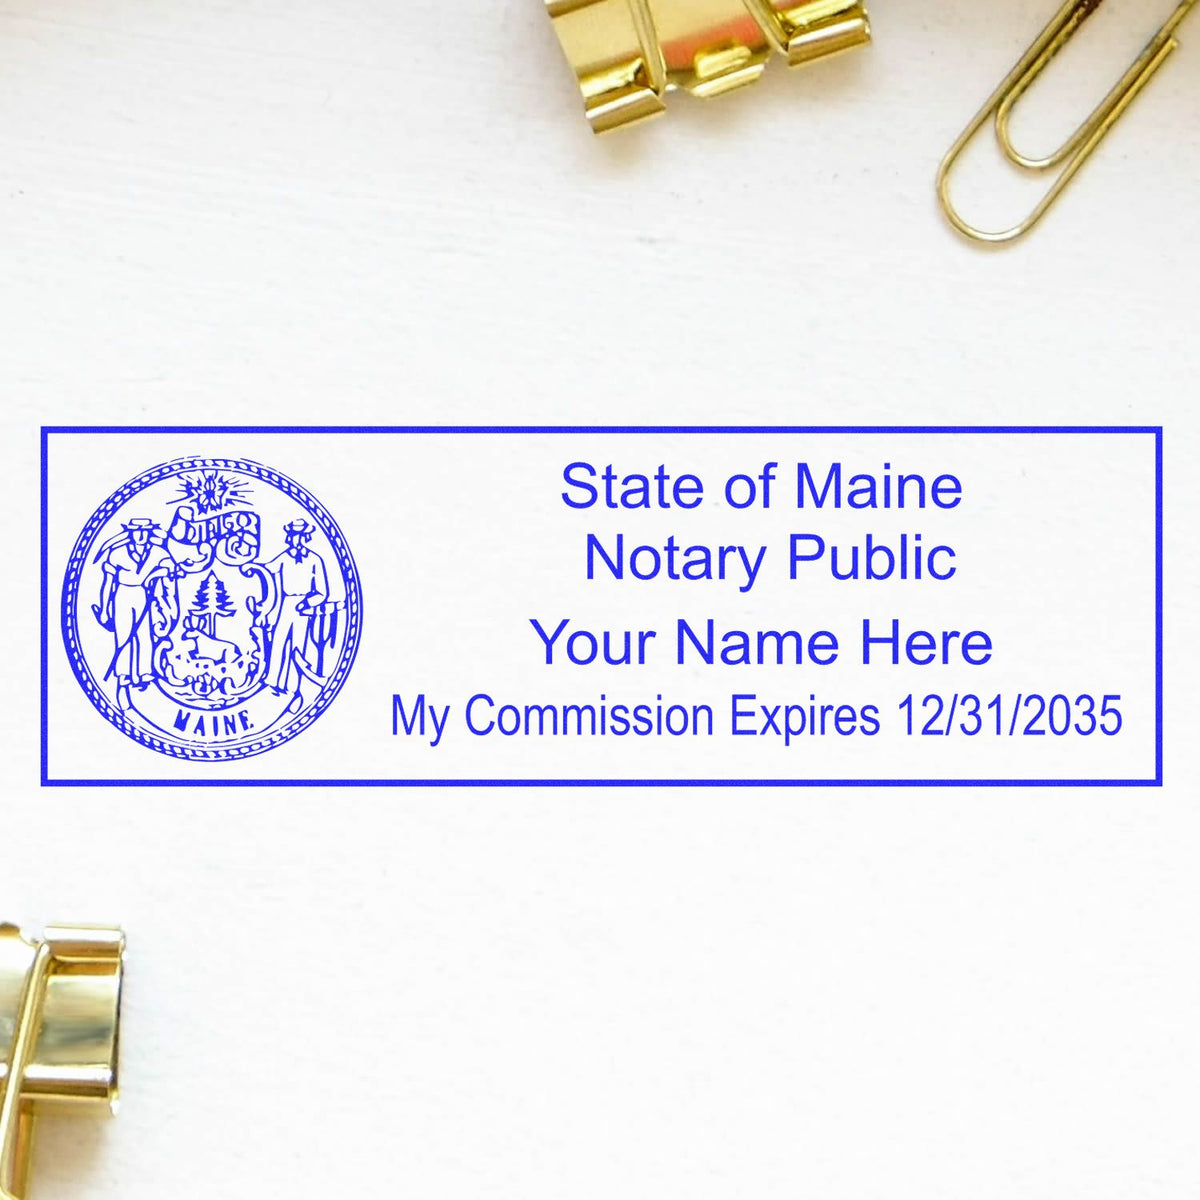 A photograph of the Heavy-Duty Maine Rectangular Notary Stamp stamp impression reveals a vivid, professional image of the on paper.